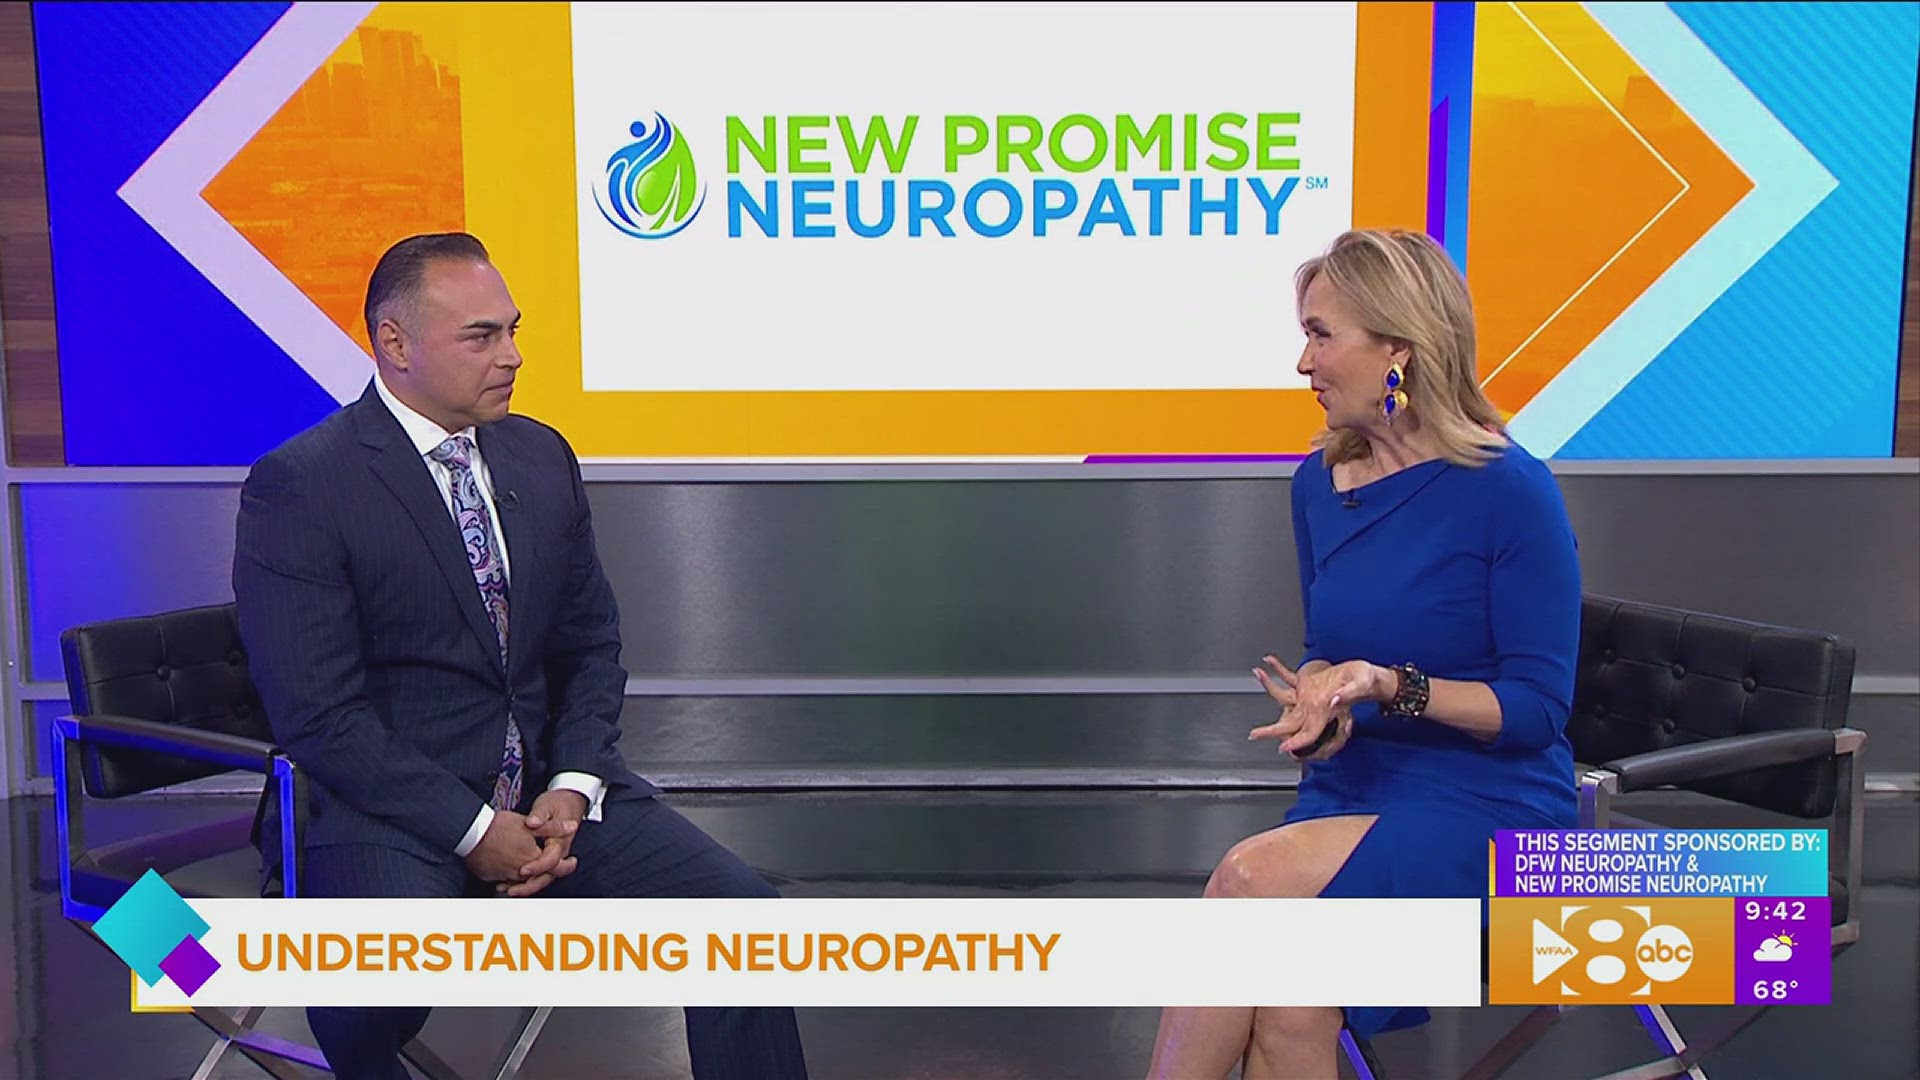 This segment is sponsored by New Promise Neuropathy & DFW Neuropathy. Call 888.573.4517 or go to newpromiseneuropathy.com for more information.